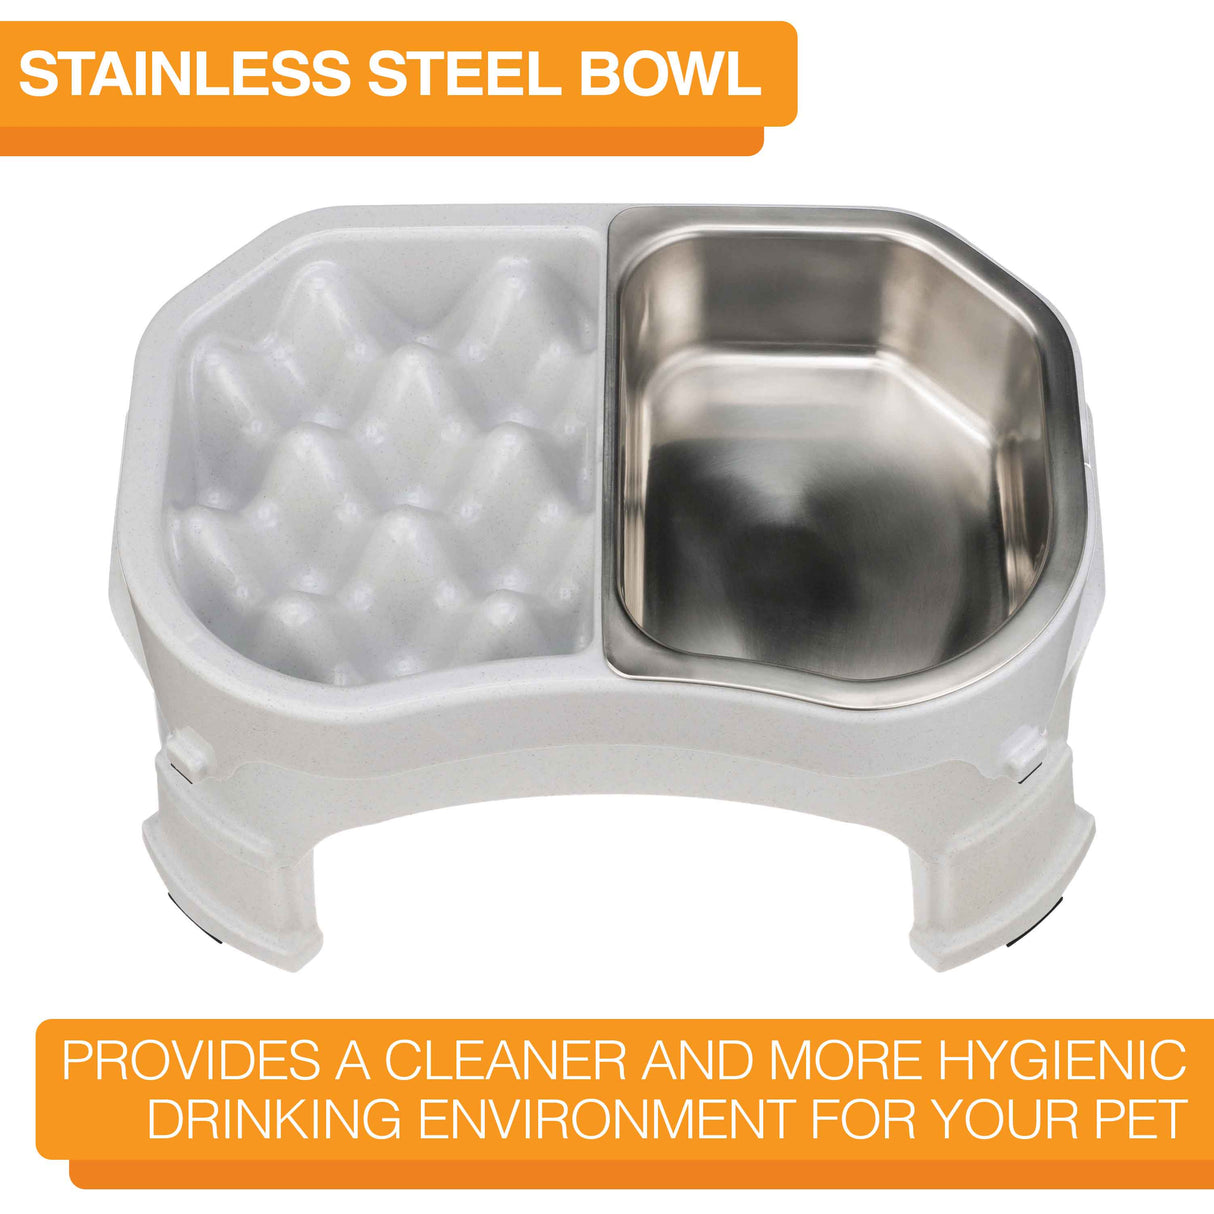 The Double Diner with the stainless steel insert is more hygienic 